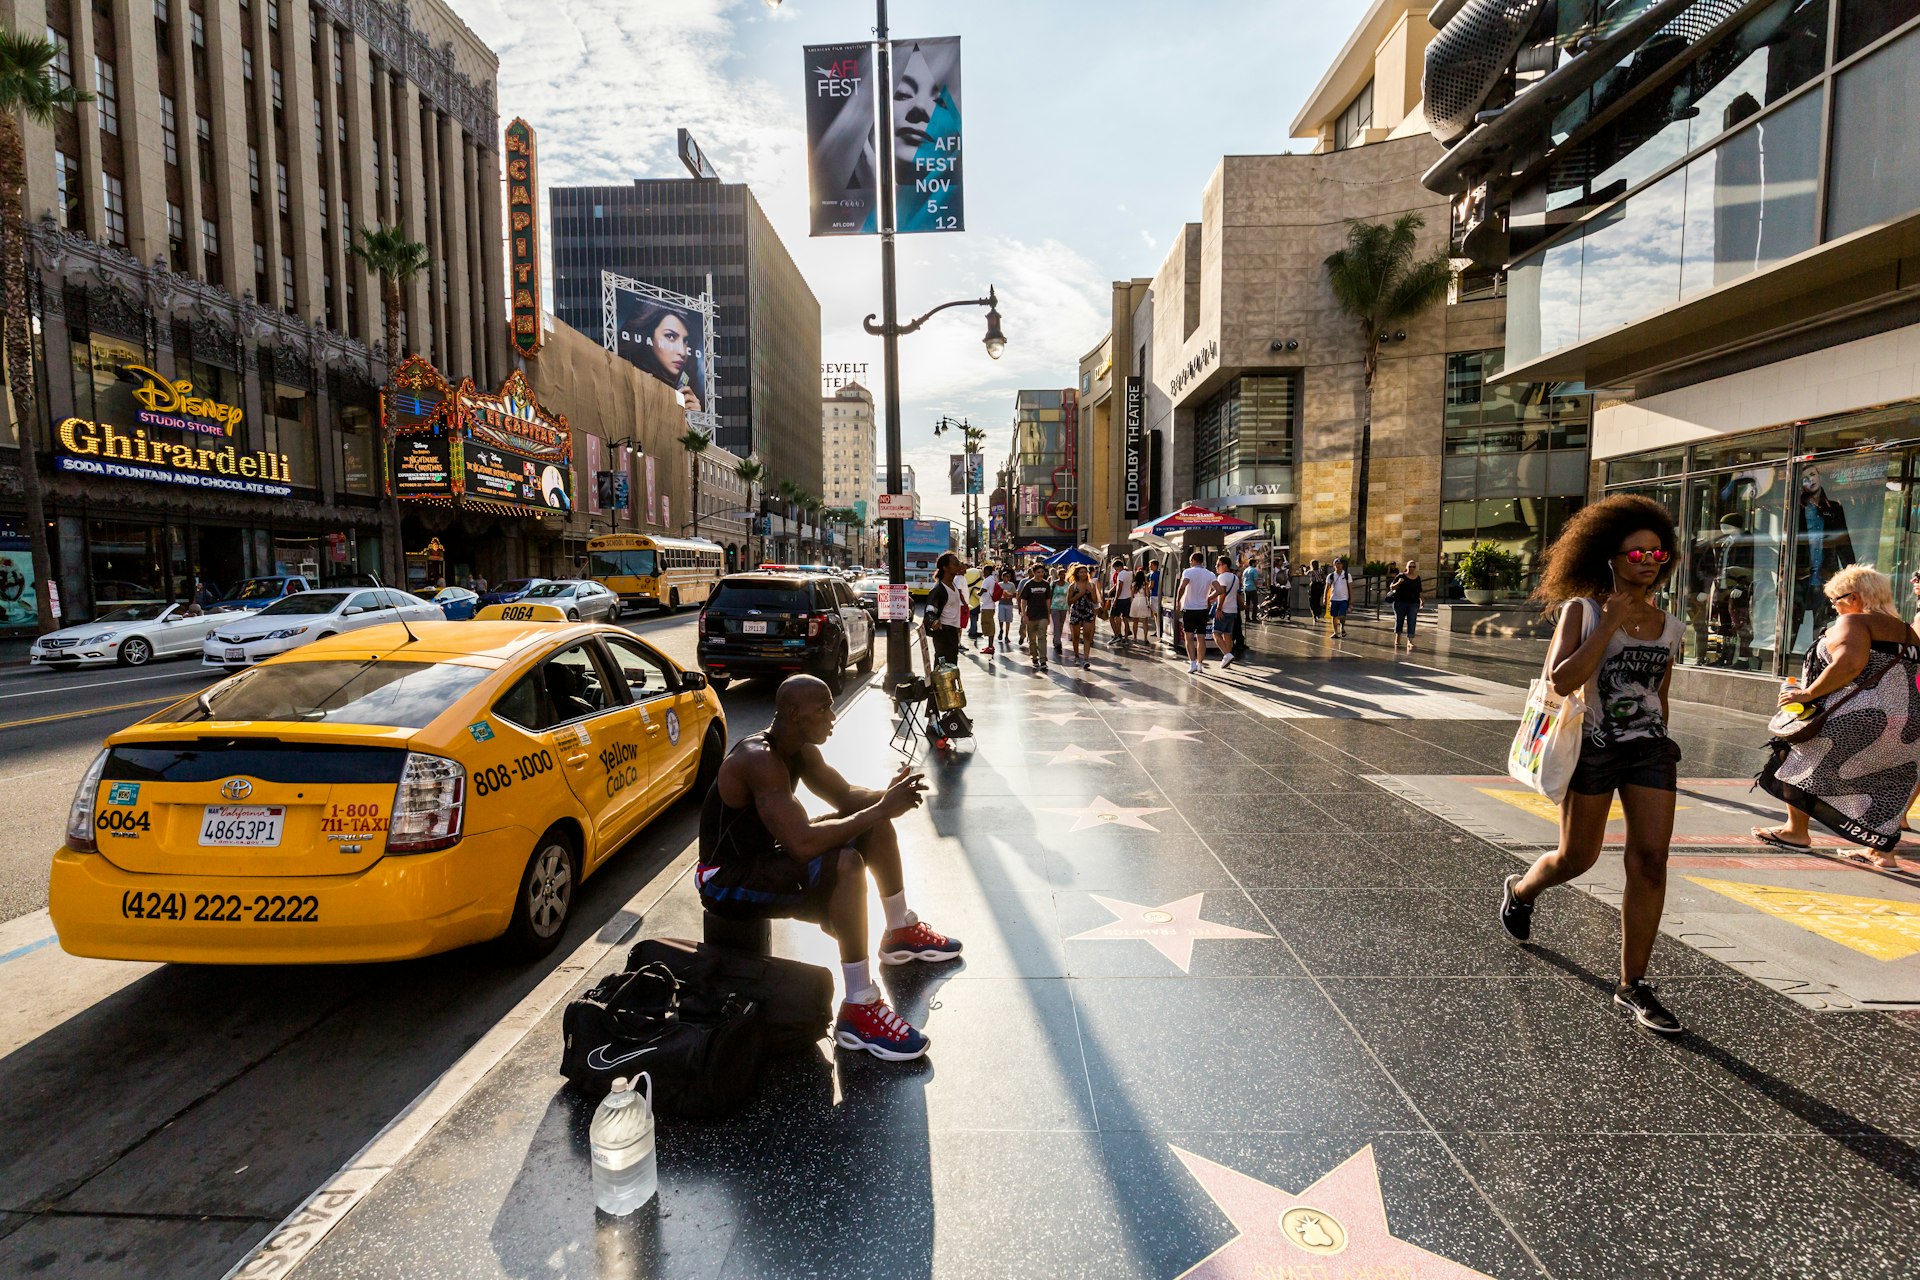 Views of the Walk of Fame and the Buildings at the Hollywood Boulevard with a woman walking in the foreground